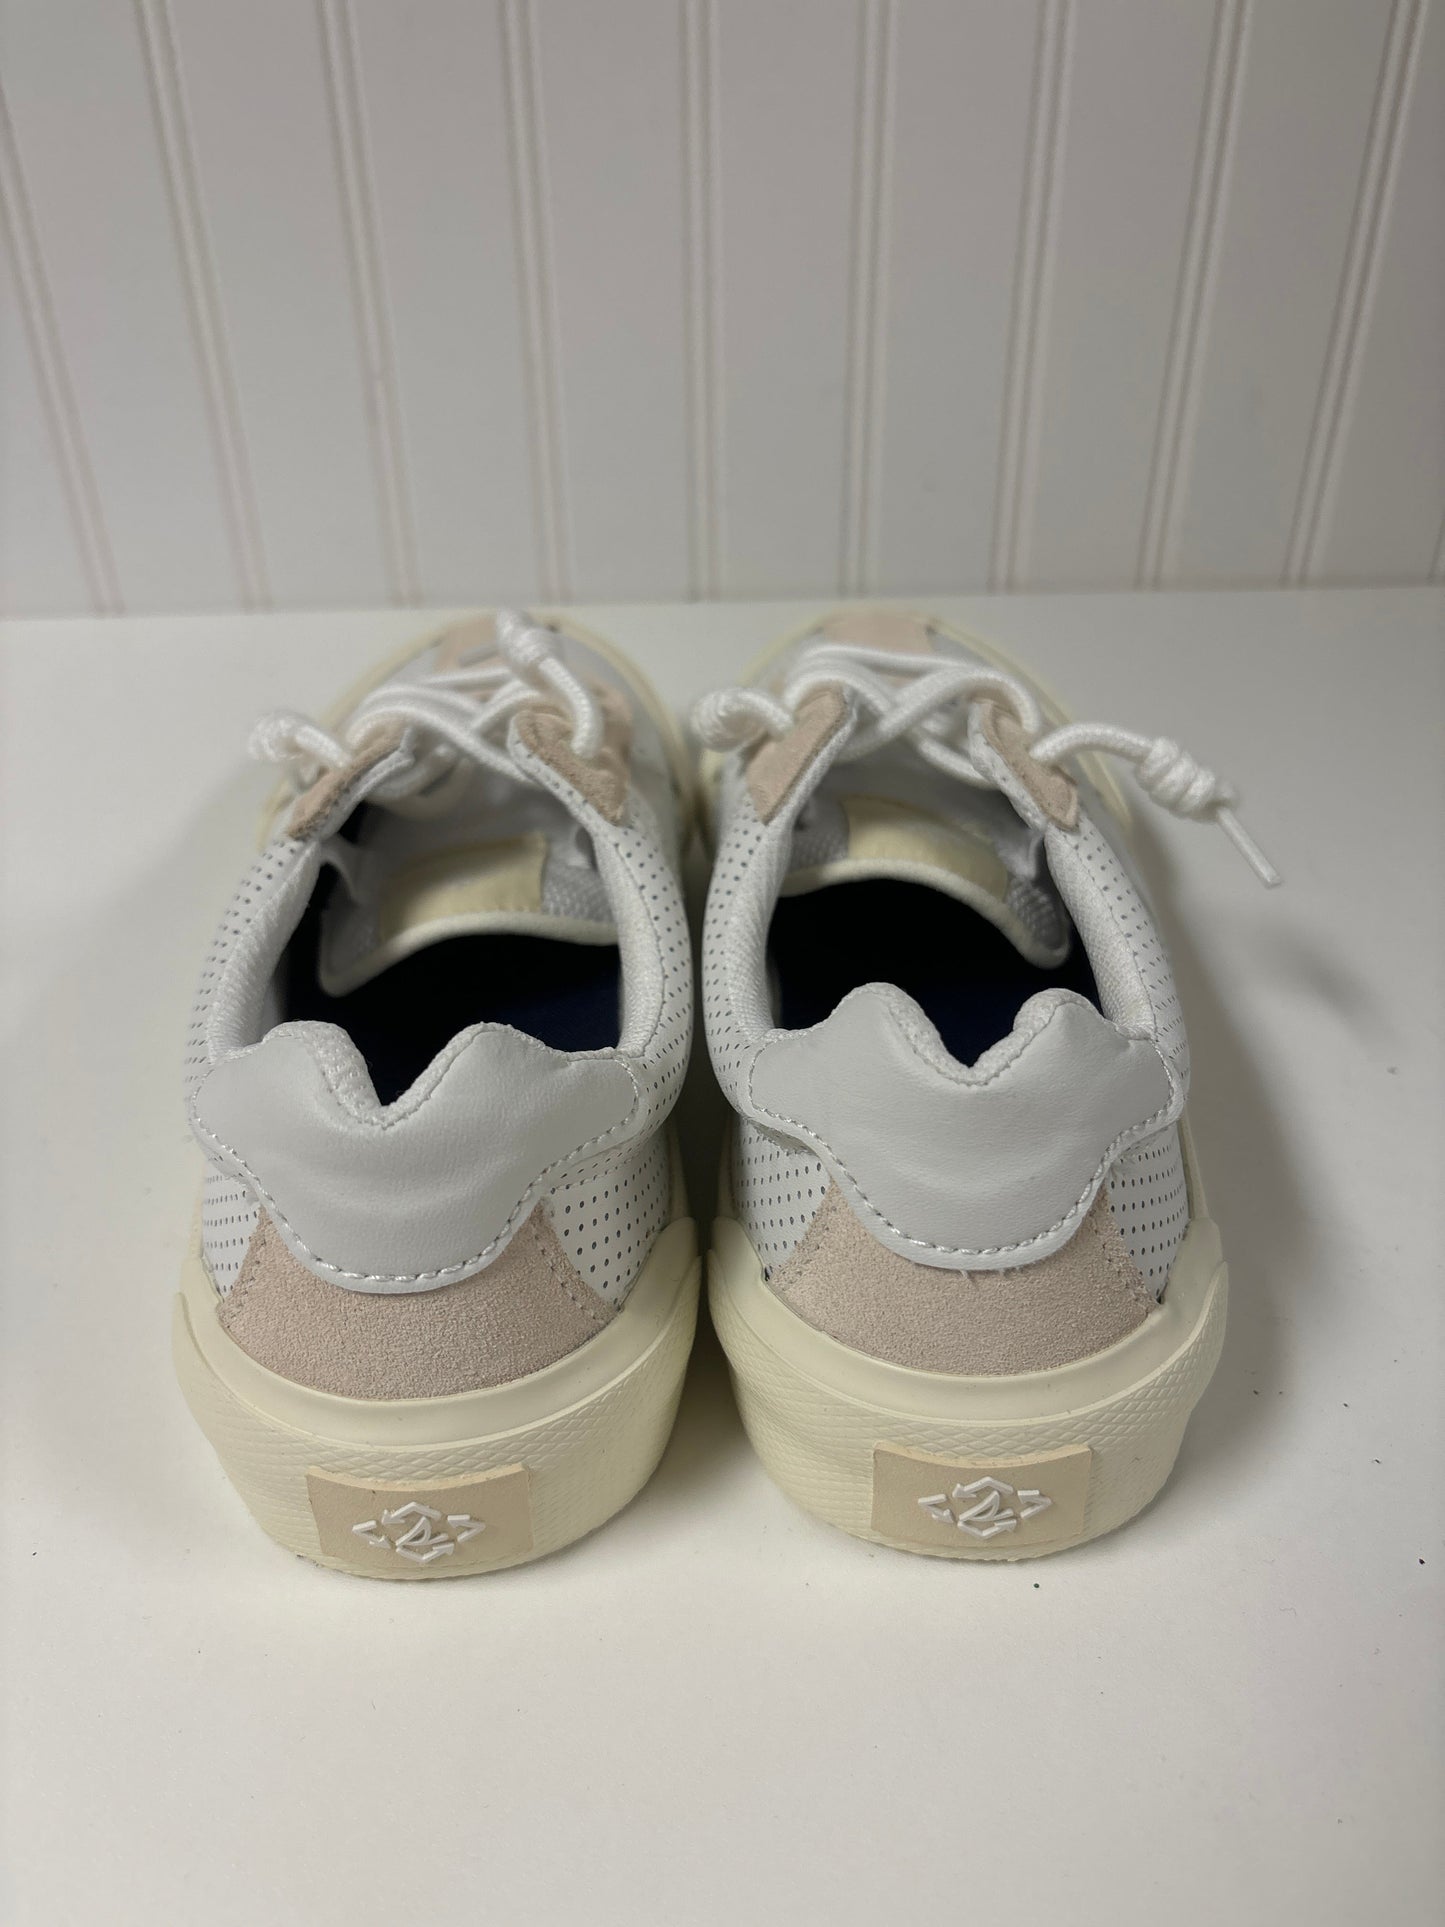 White Shoes Sneakers Sperry, Size 7